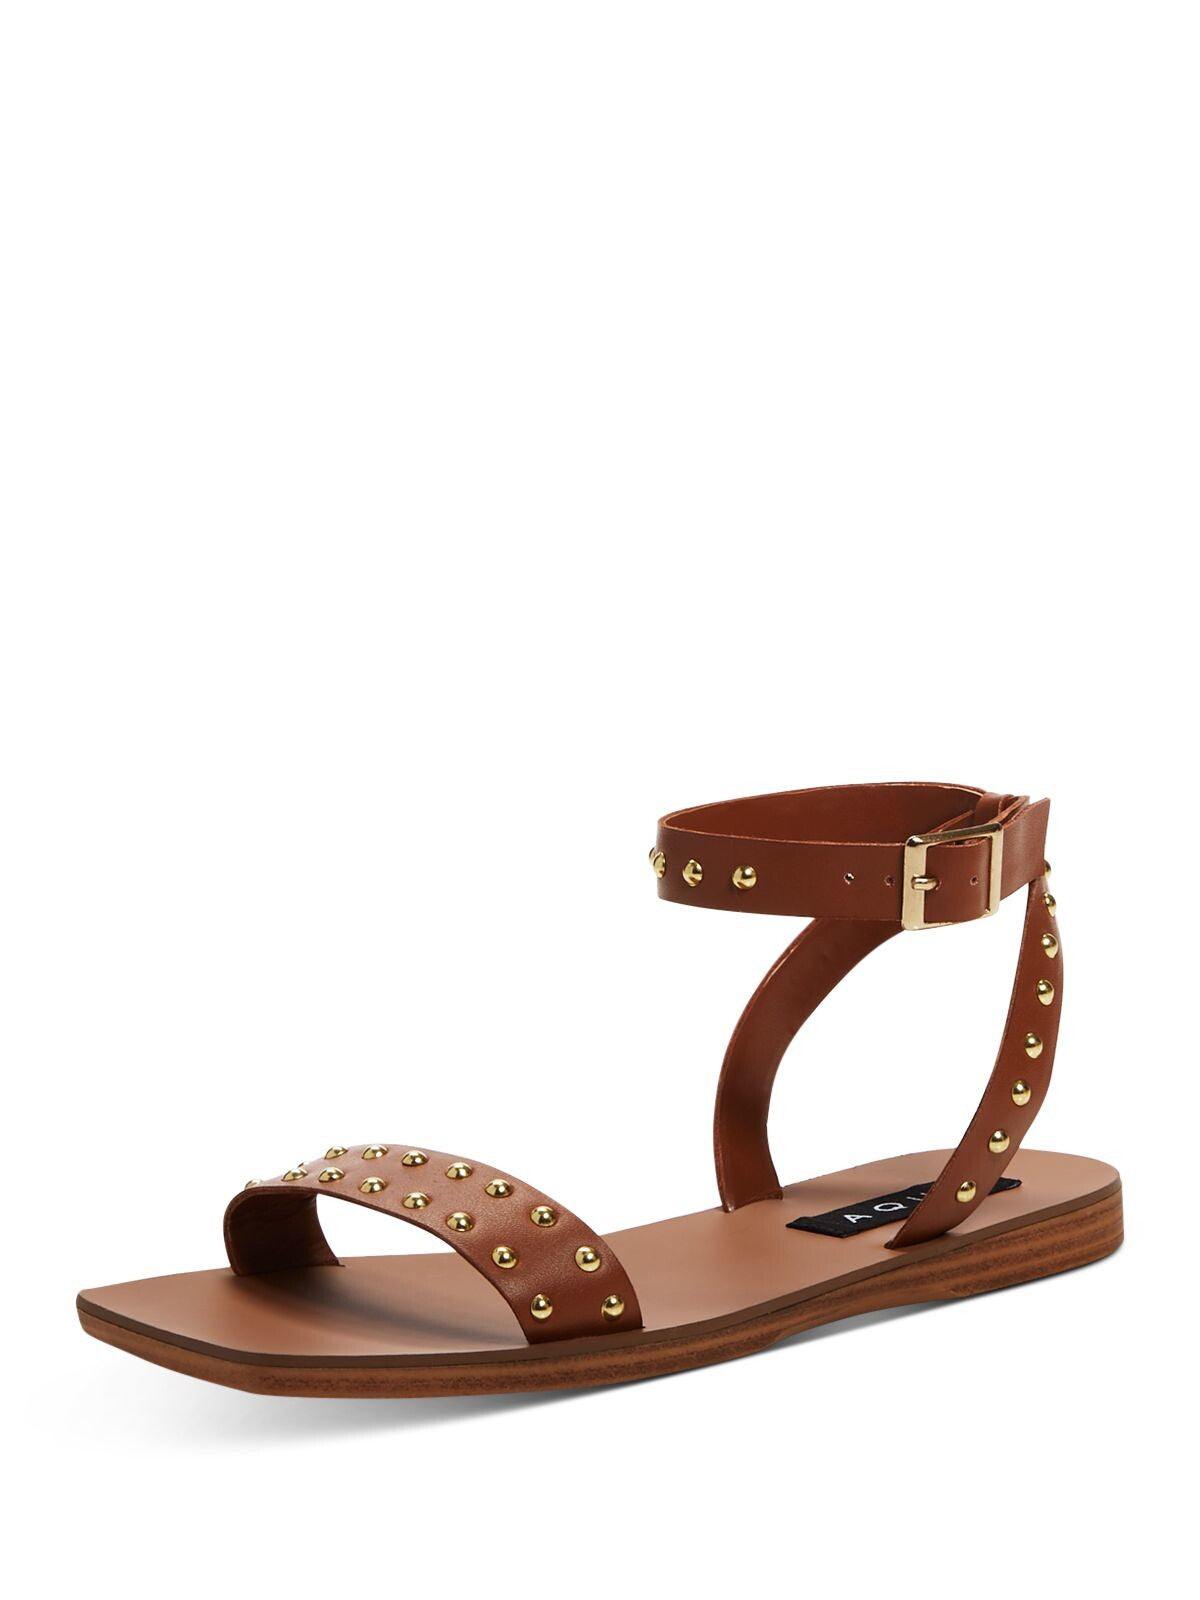 AQUA Womens Brown Adjustable Studded Ankle Strap Sophy Square Toe Wedge Buckle Leather Gladiator Sandals Shoes 6.5 M